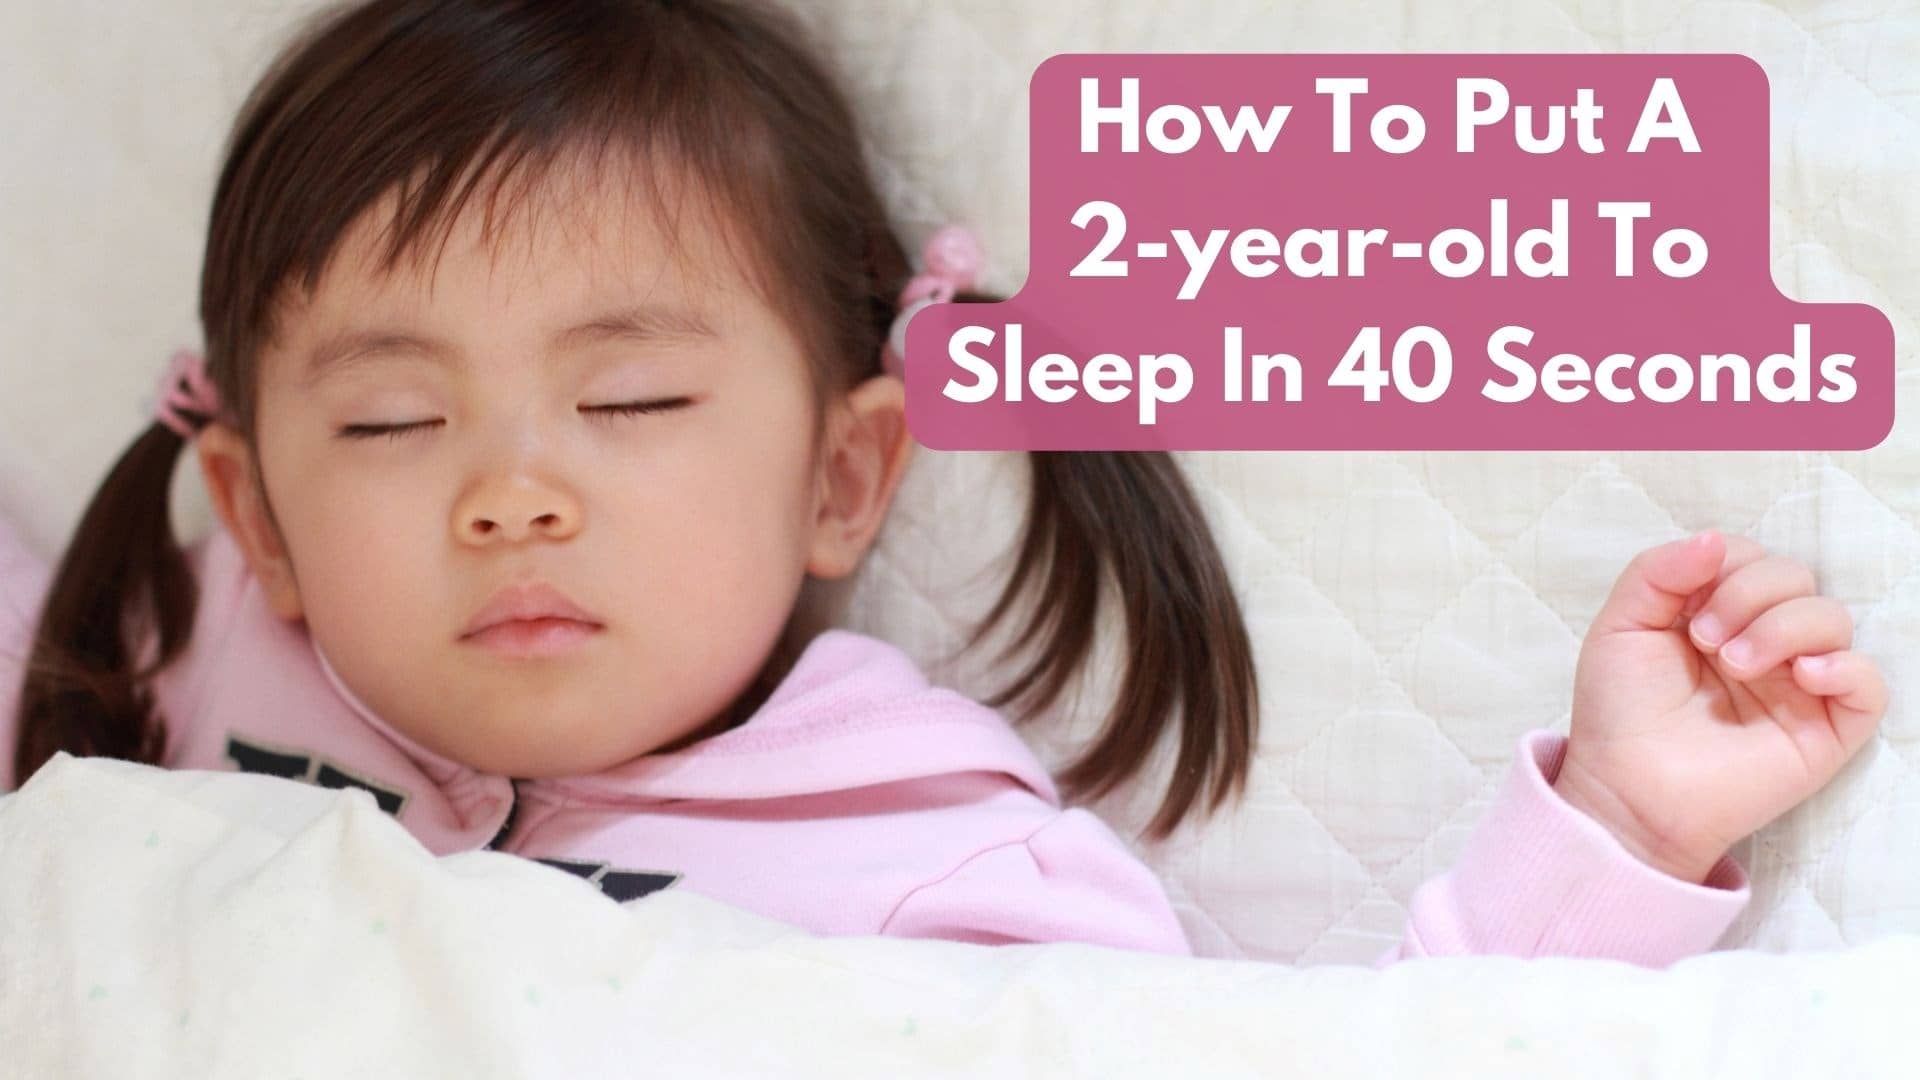 How To Put A 2-year-old To Sleep In 40 Seconds